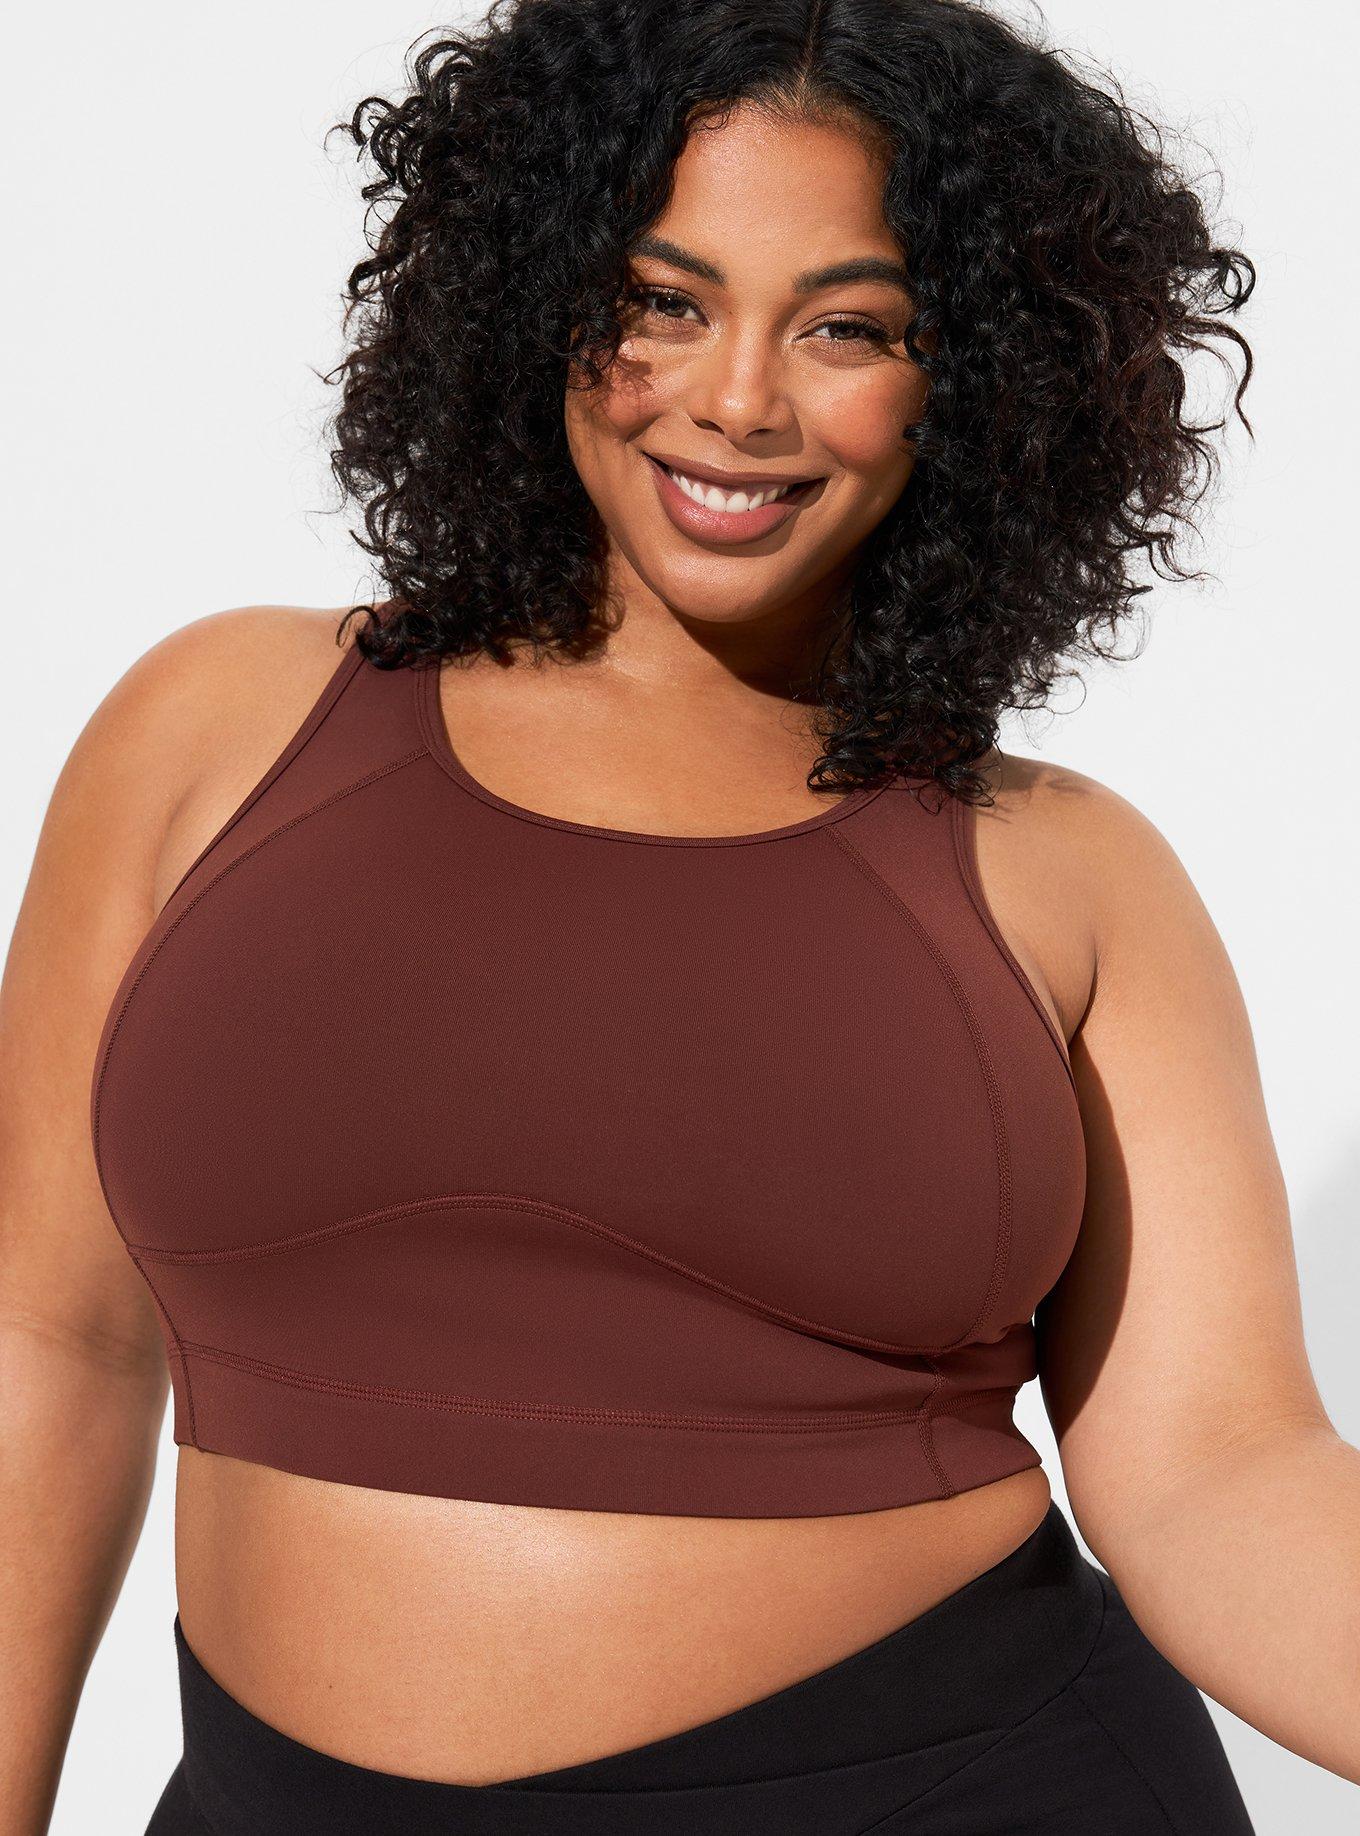   Essentials Women's Active Low Impact Longline Seamless Sports  Bra (Available in Plus Size), Pack of 2, Dark Olive/Light Grey, Medium :  Clothing, Shoes & Jewelry